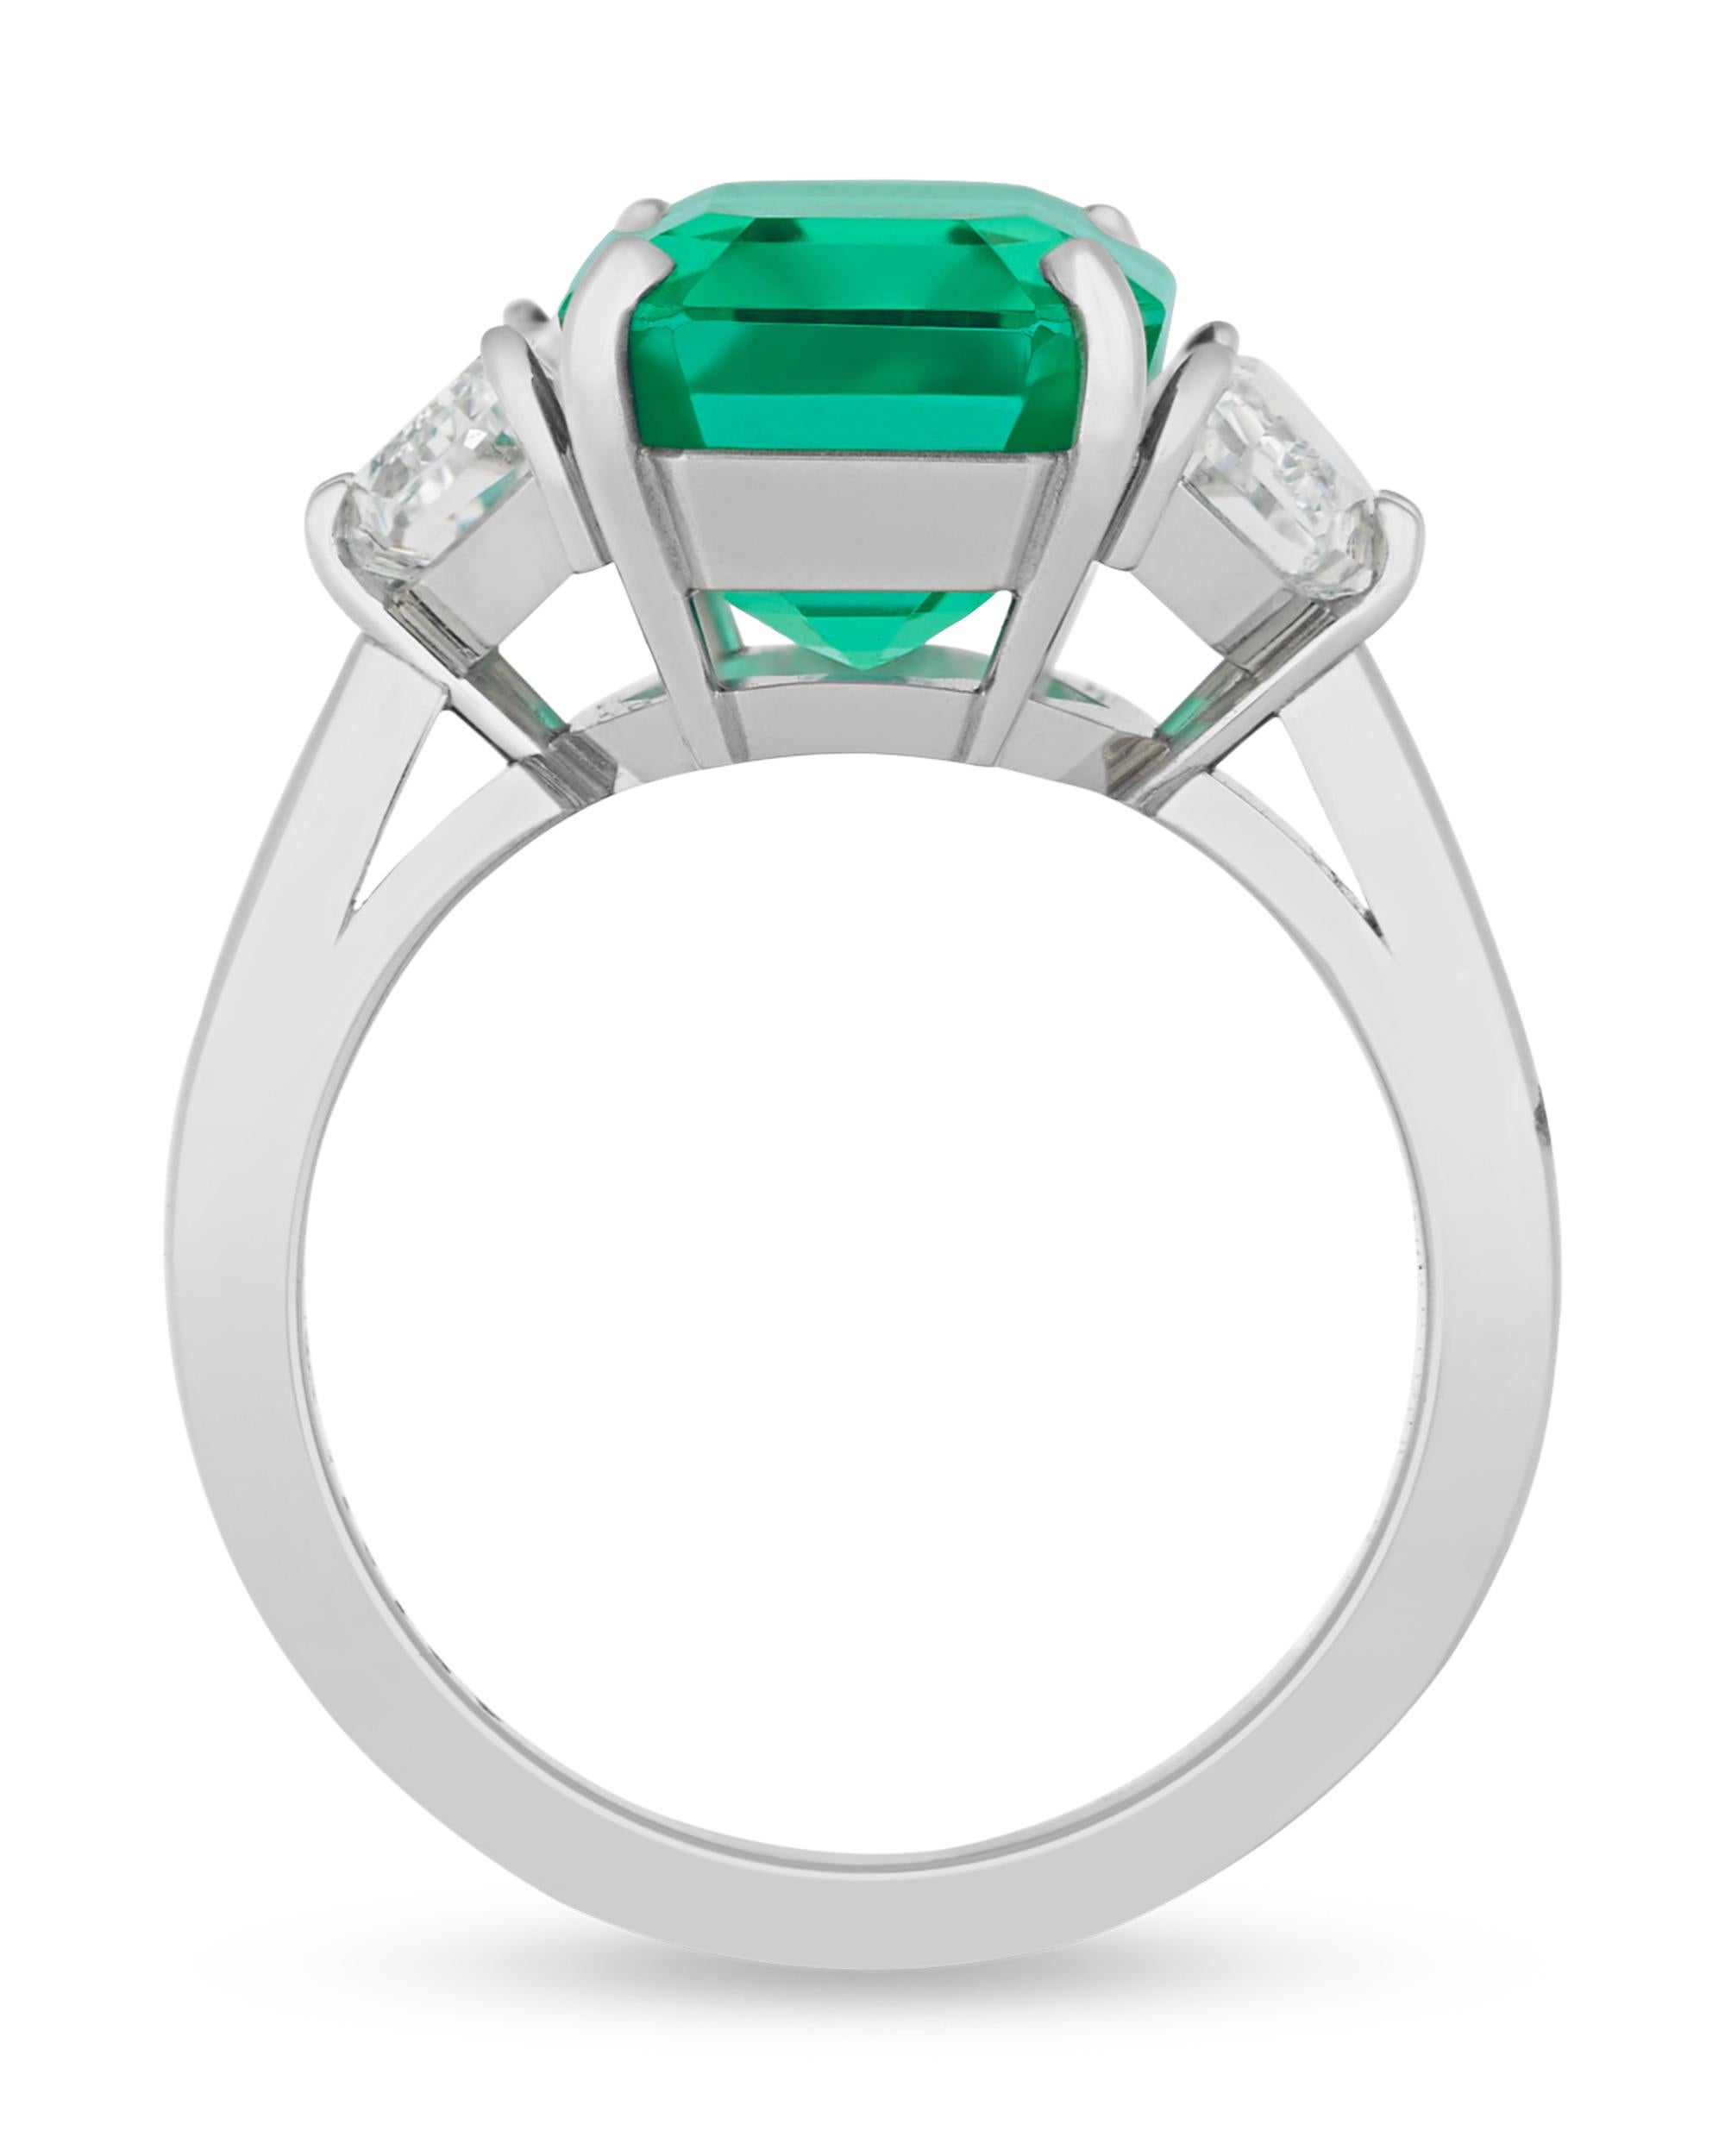 An exquisite and rare 7.16-carat Russian emerald centers this spectacular ring. A remarkable gemstone of unmatched quality, this emerald won the prestigious 